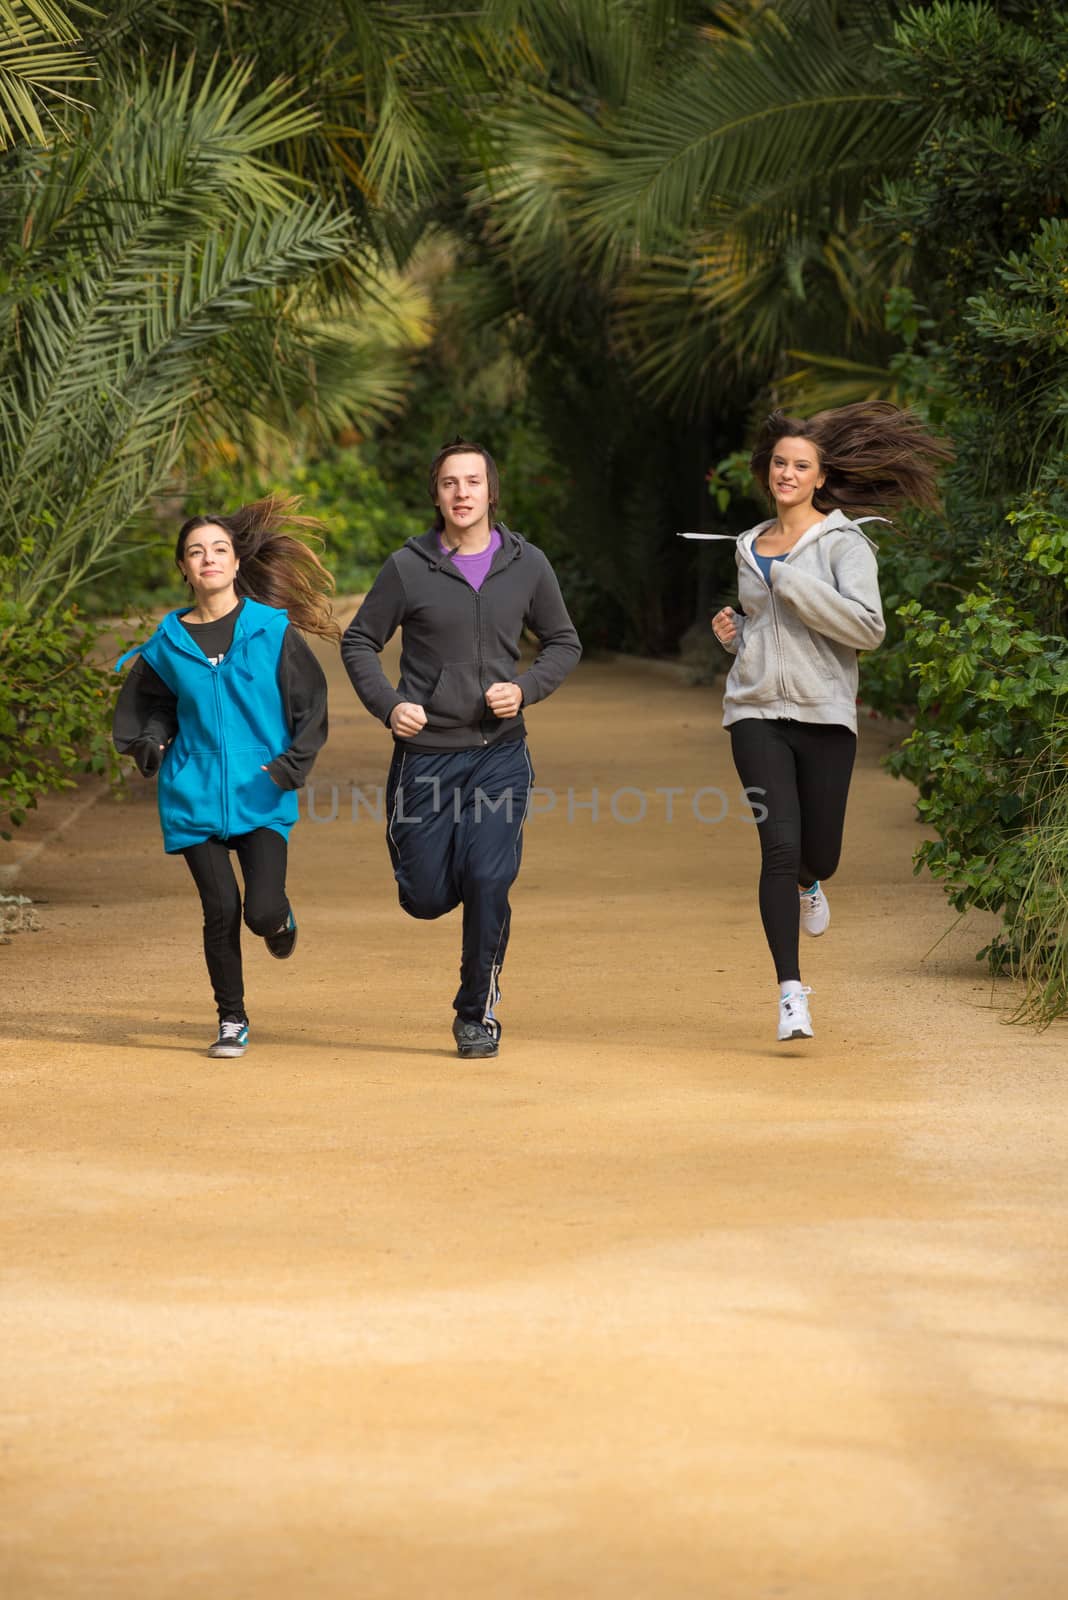 Active people jogging in a  lush park